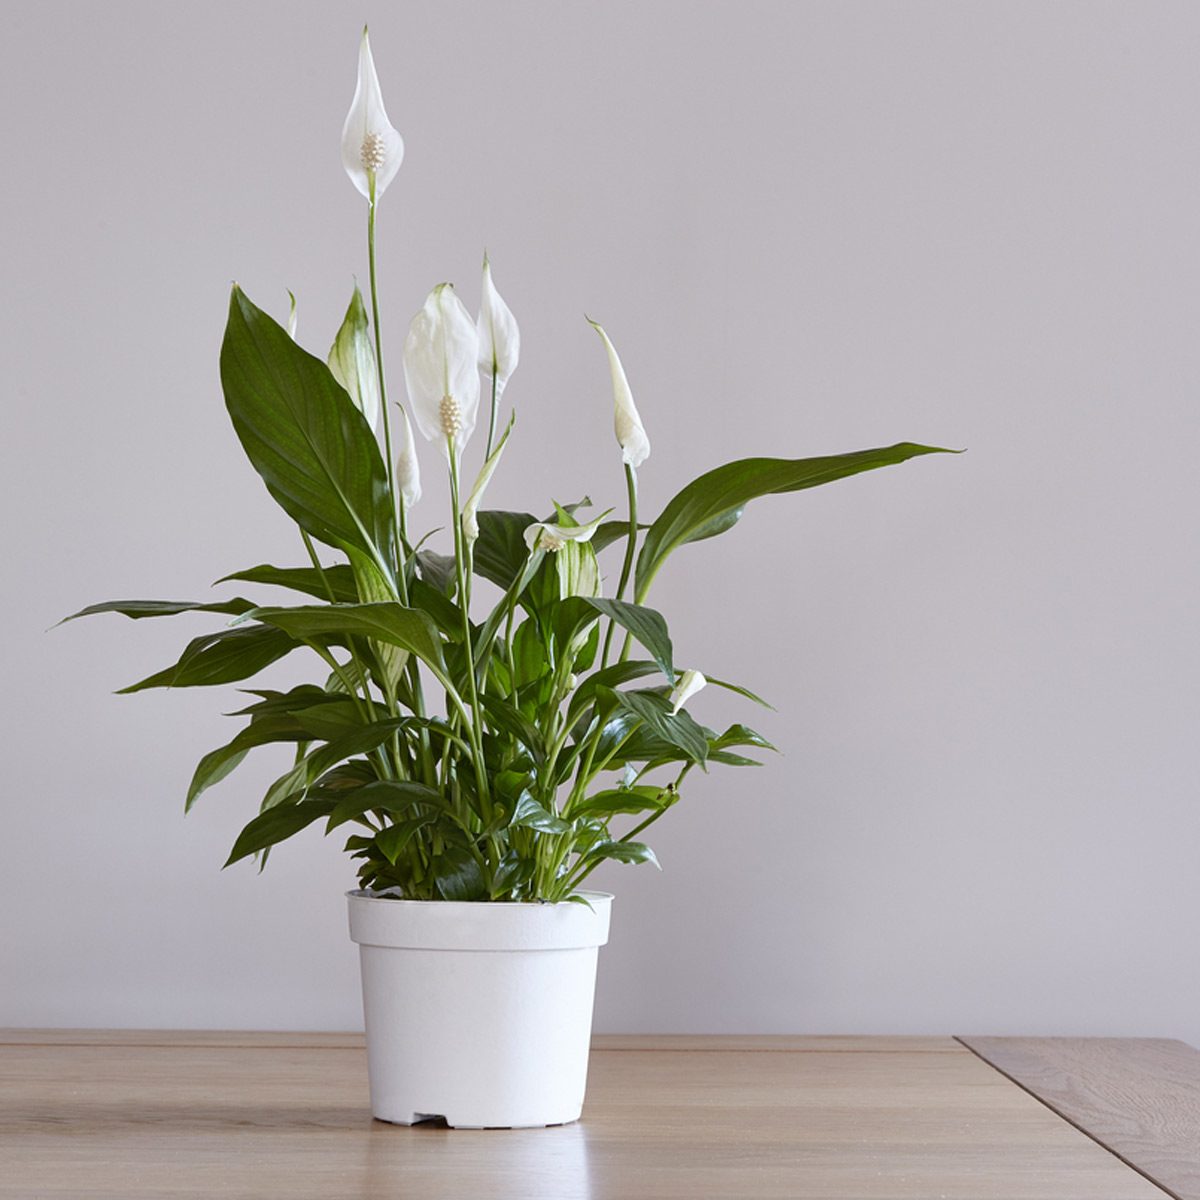 11 Air-Purifying Plants for a Healthy Home